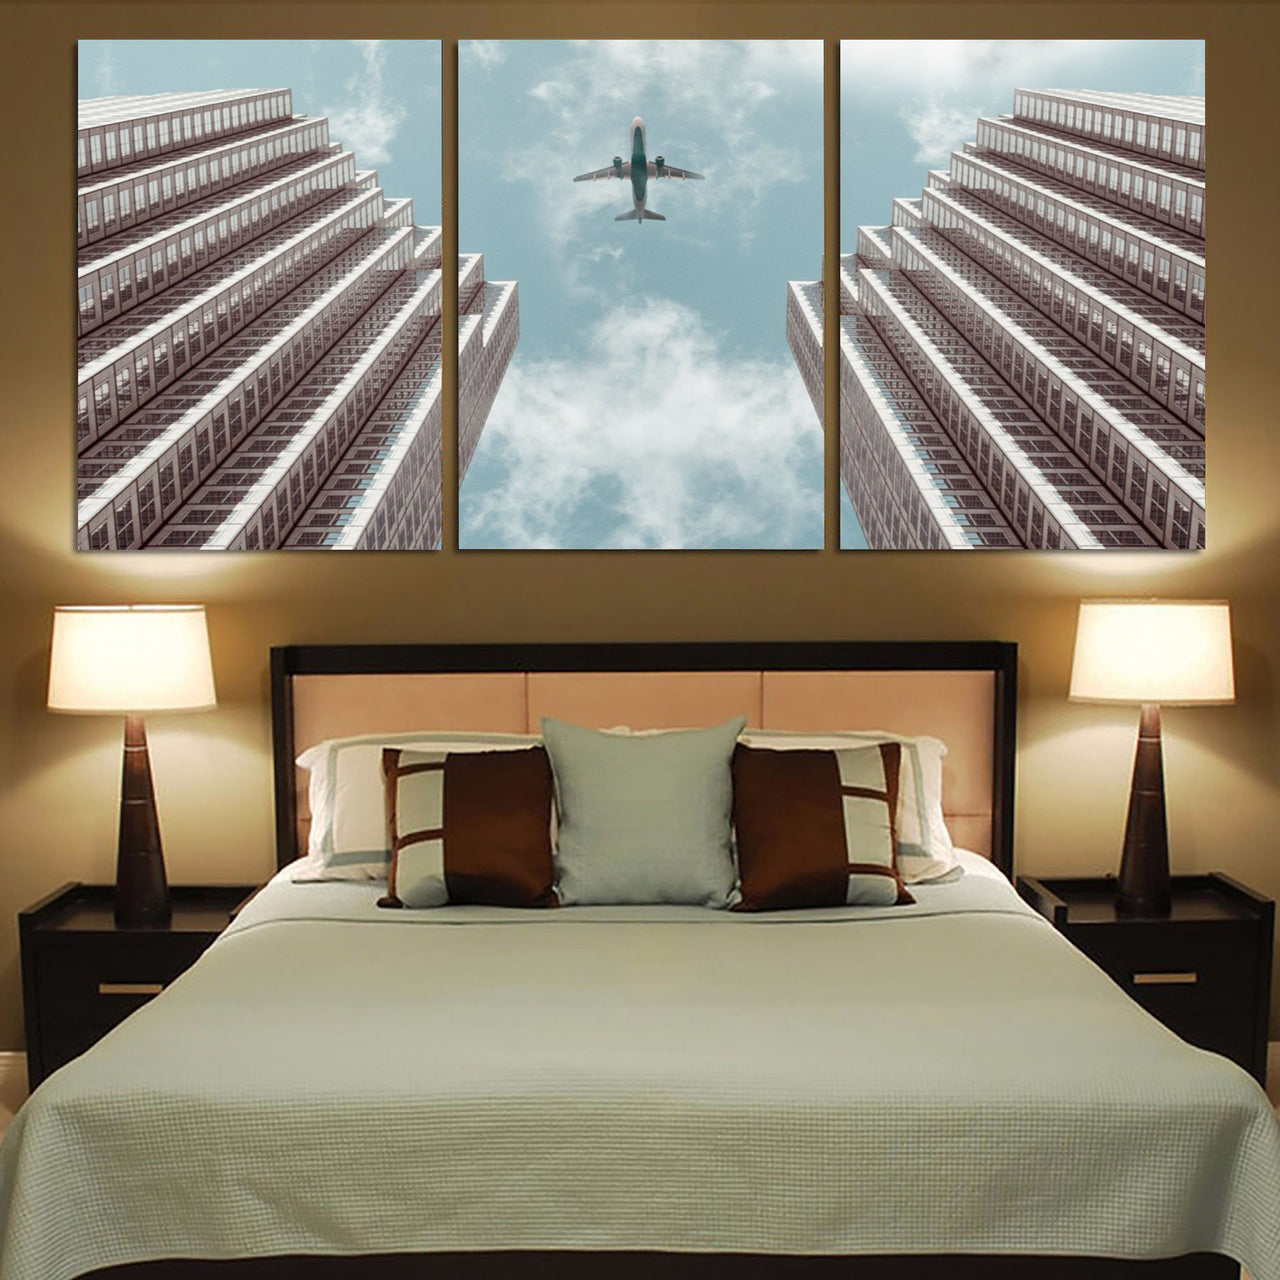 Airplane Flying over Big Buildings Printed Canvas Posters (3 Pieces) Aviation Shop 